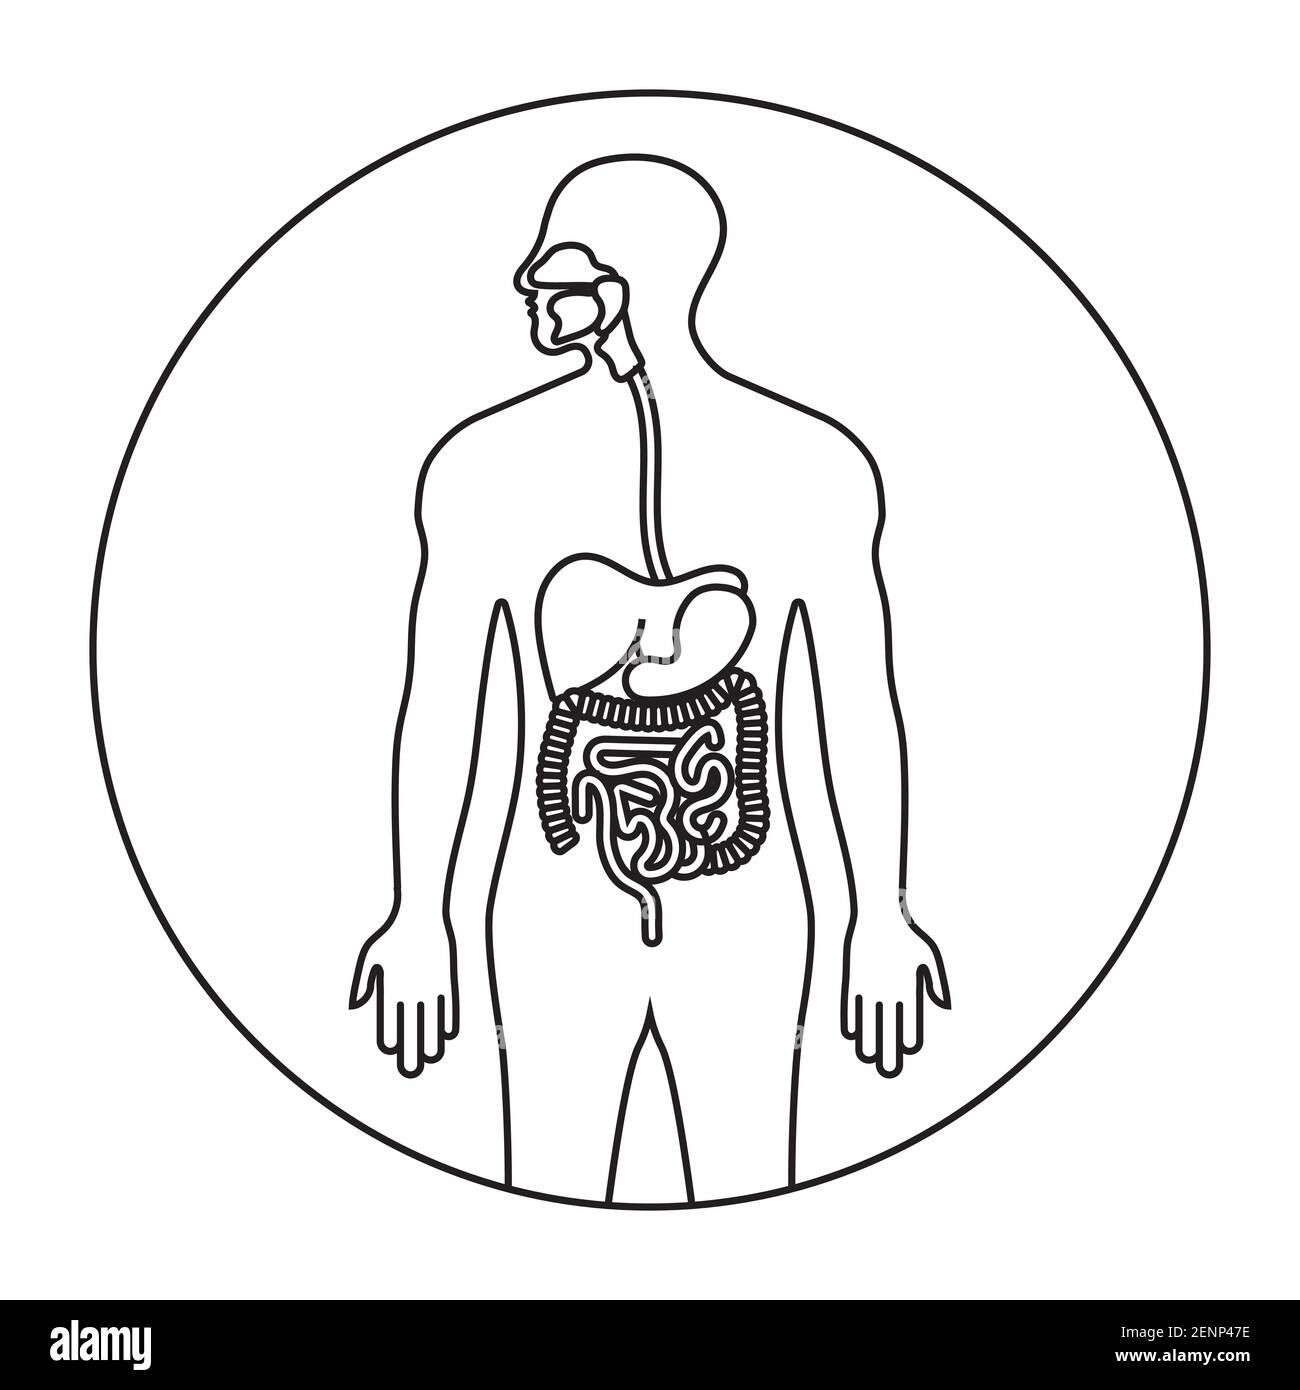 Human alimentary canal or digestive system line art icon for apps and websites Stock Vector